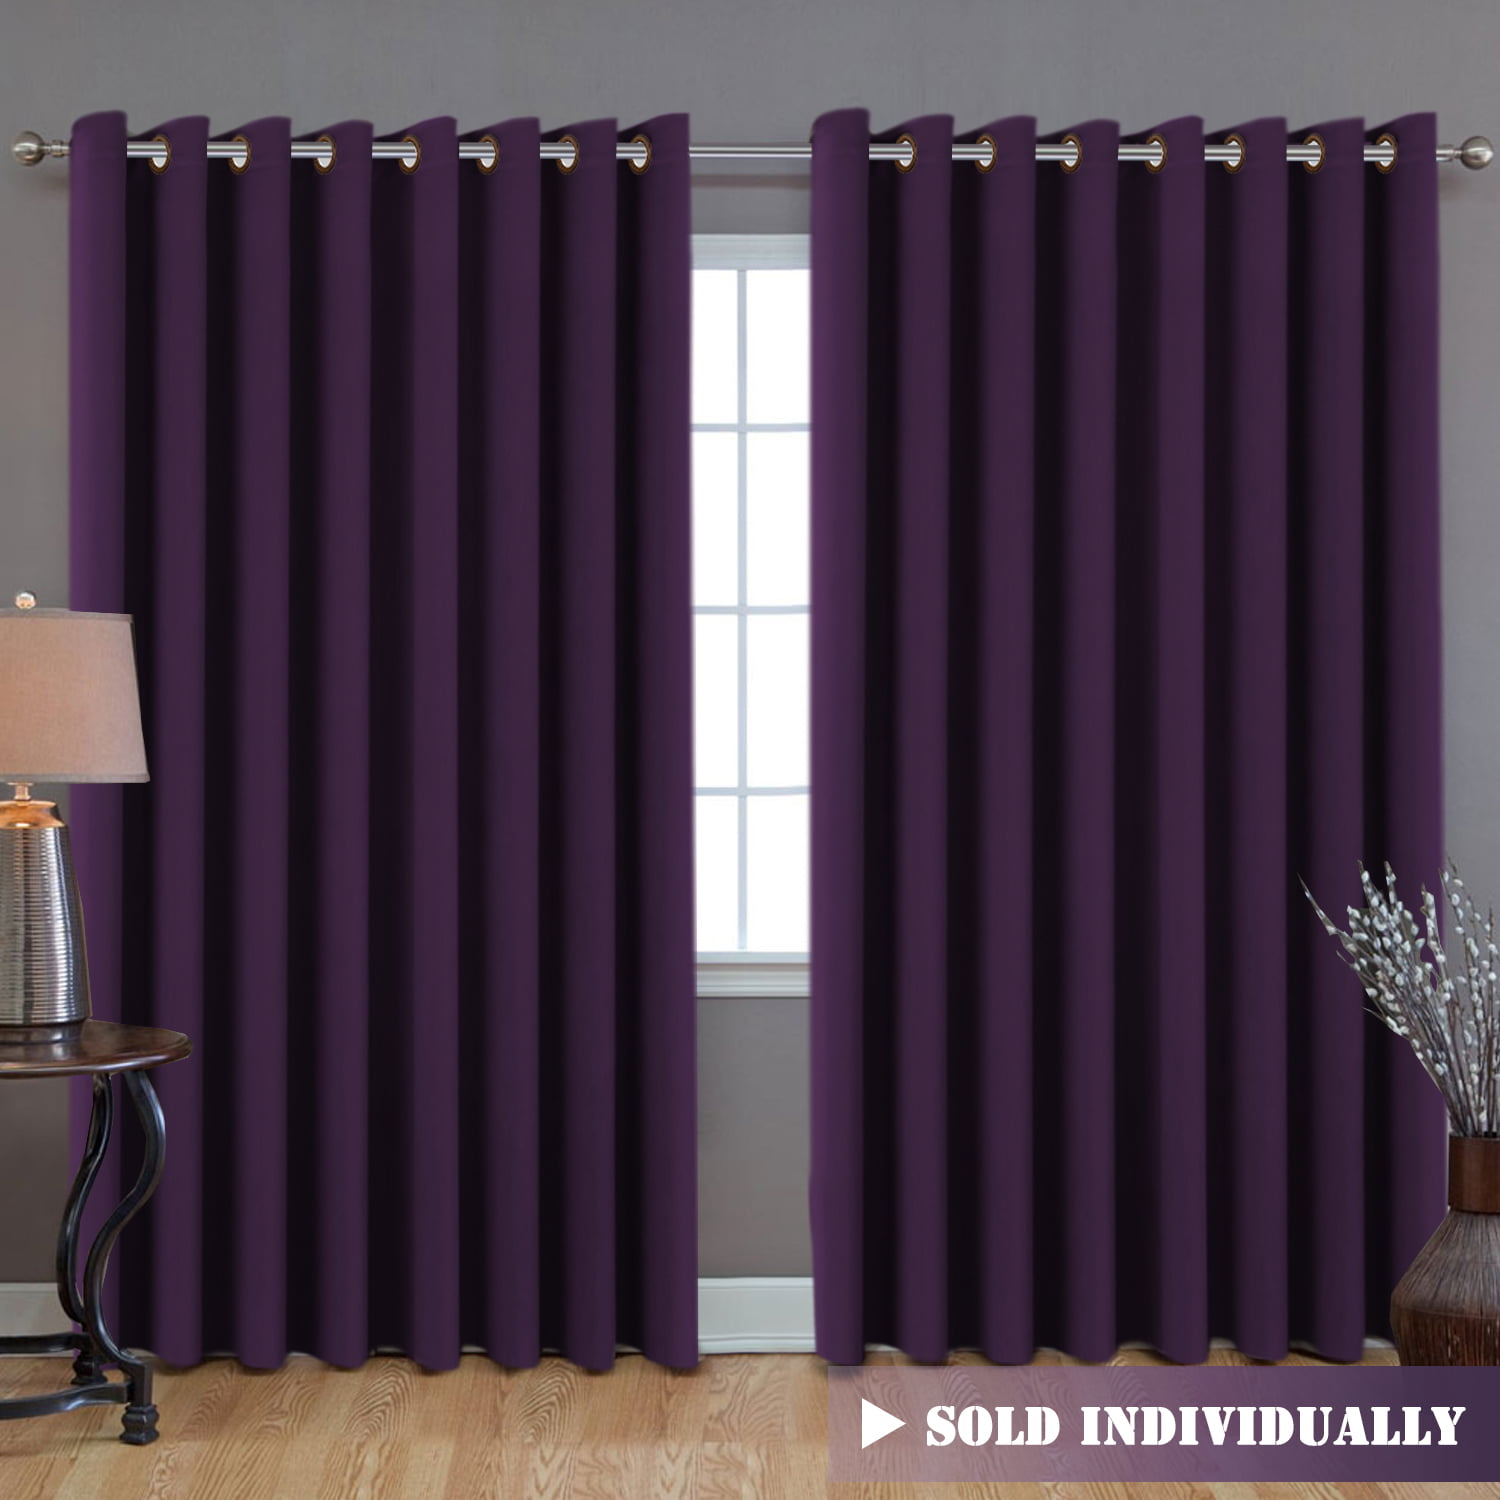 Blackout Room Divider Curtain Panel Privacy Screen Thermal Insulated Burgundy